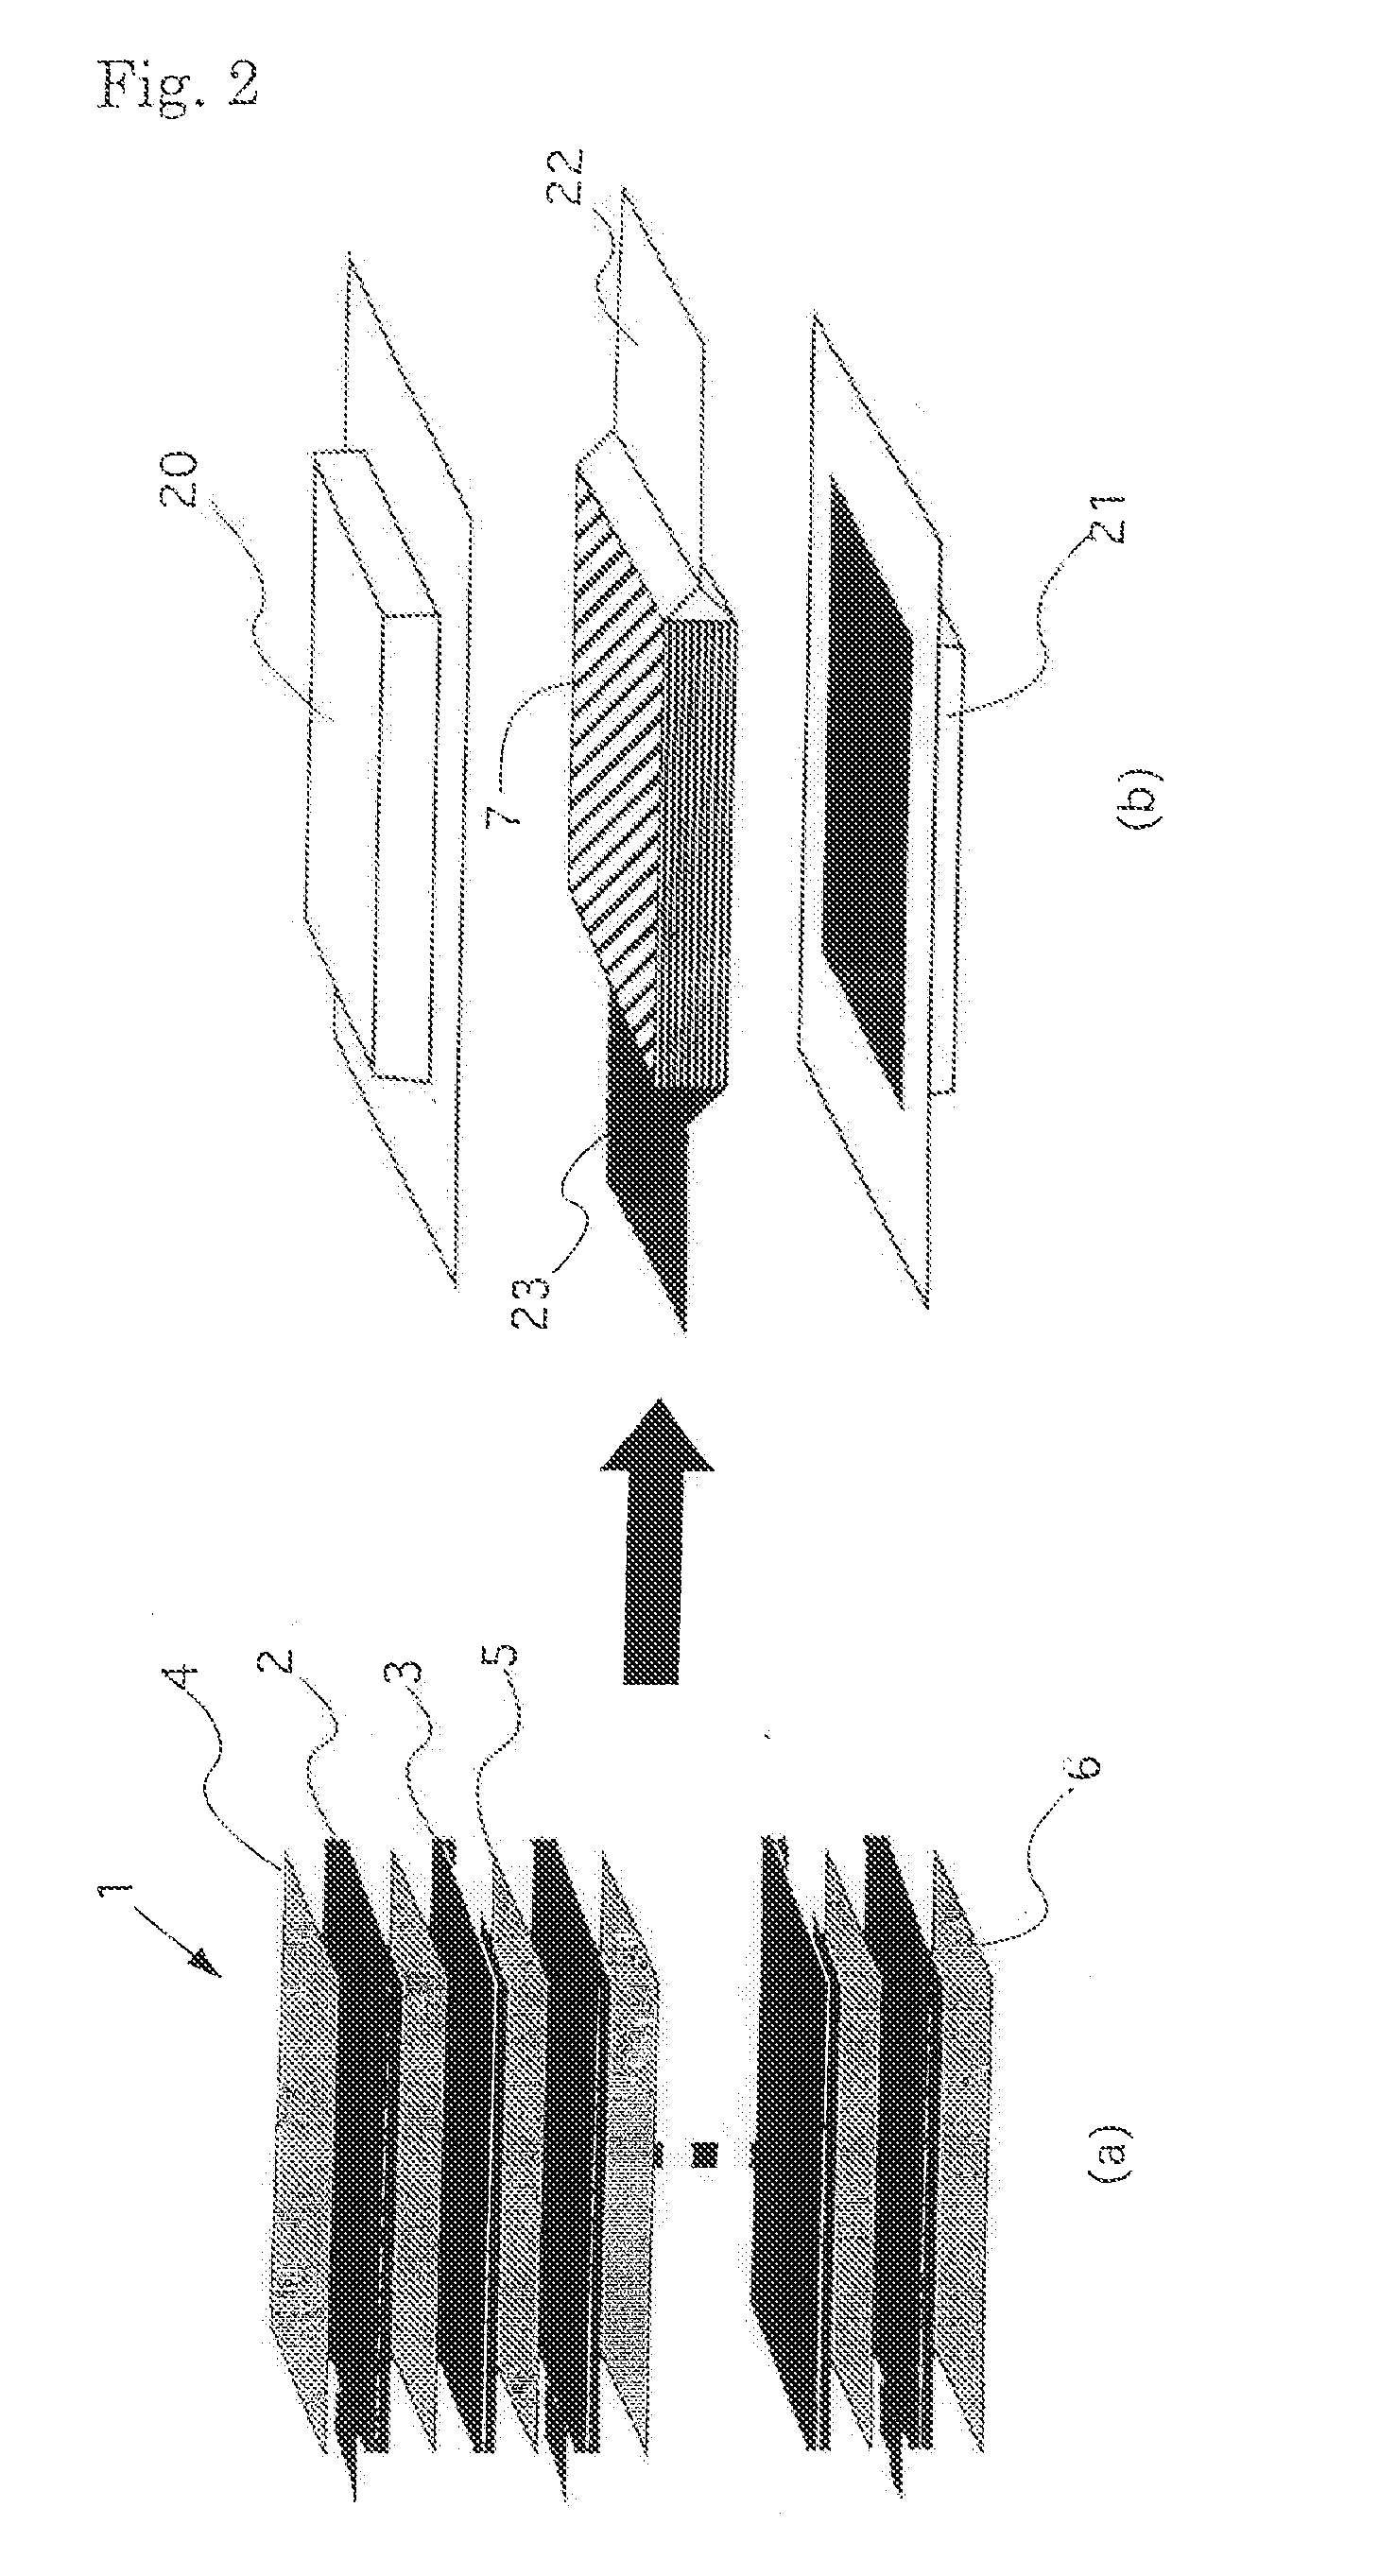 Coated electrode and organic electrolyte capacitor